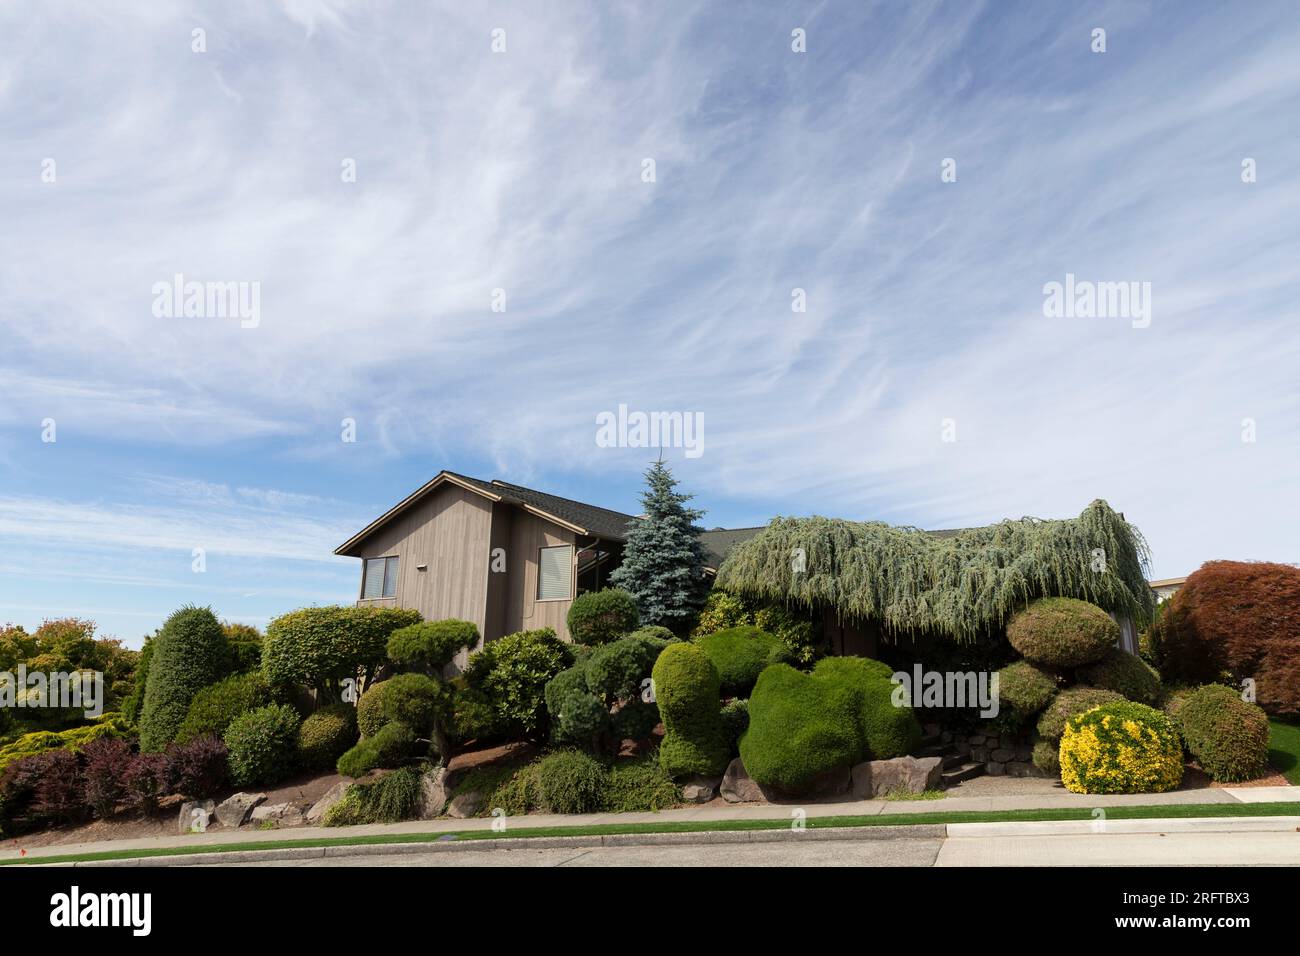 Lush landscaping envelopes a home in Seattle’s affluent North Admiral neighborhood Stock Photo